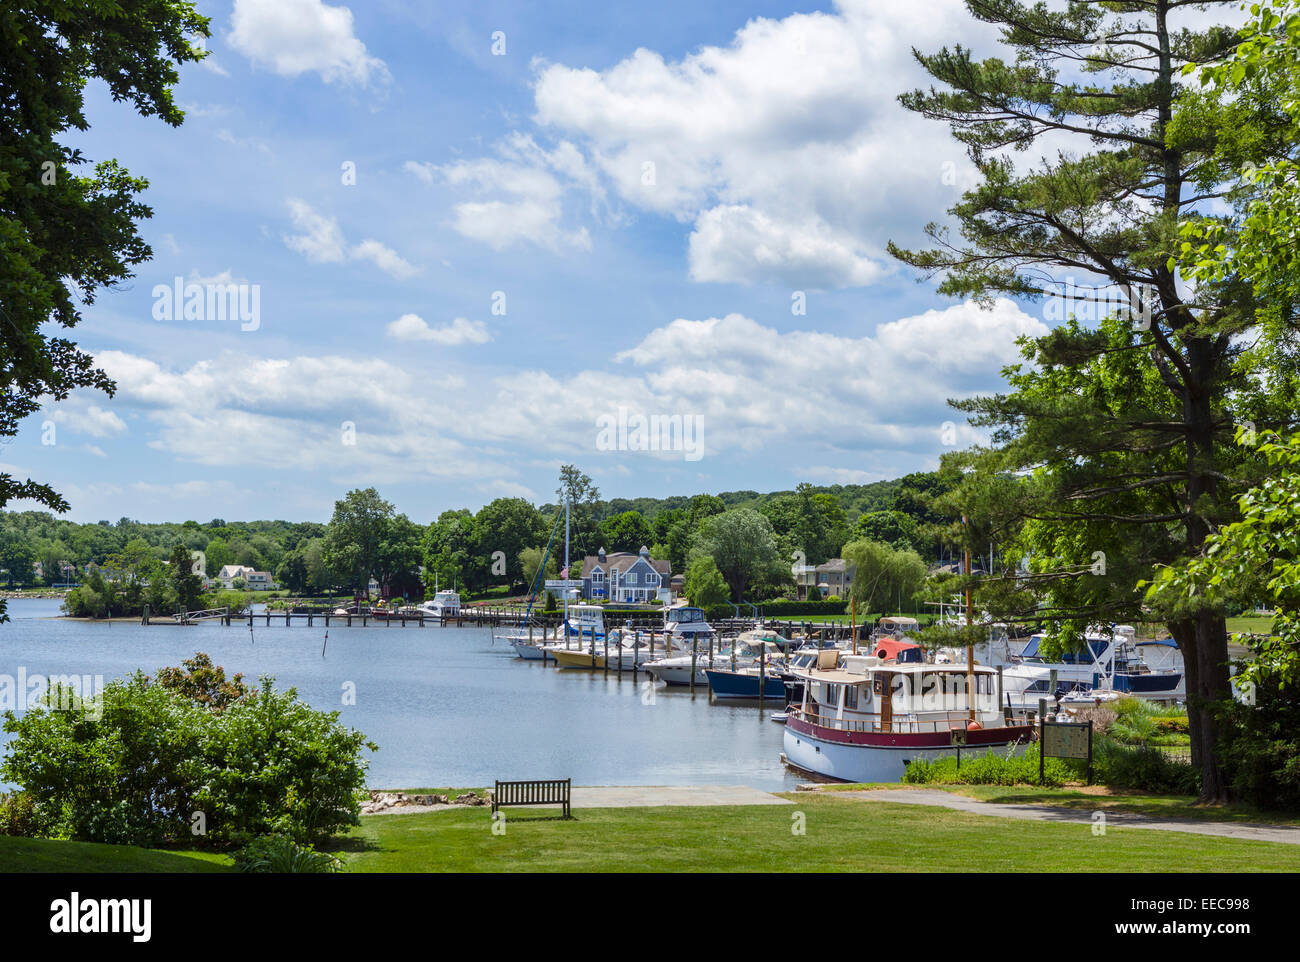 Waterfront in the park in Essex, Connecticut, USA Stock Photo